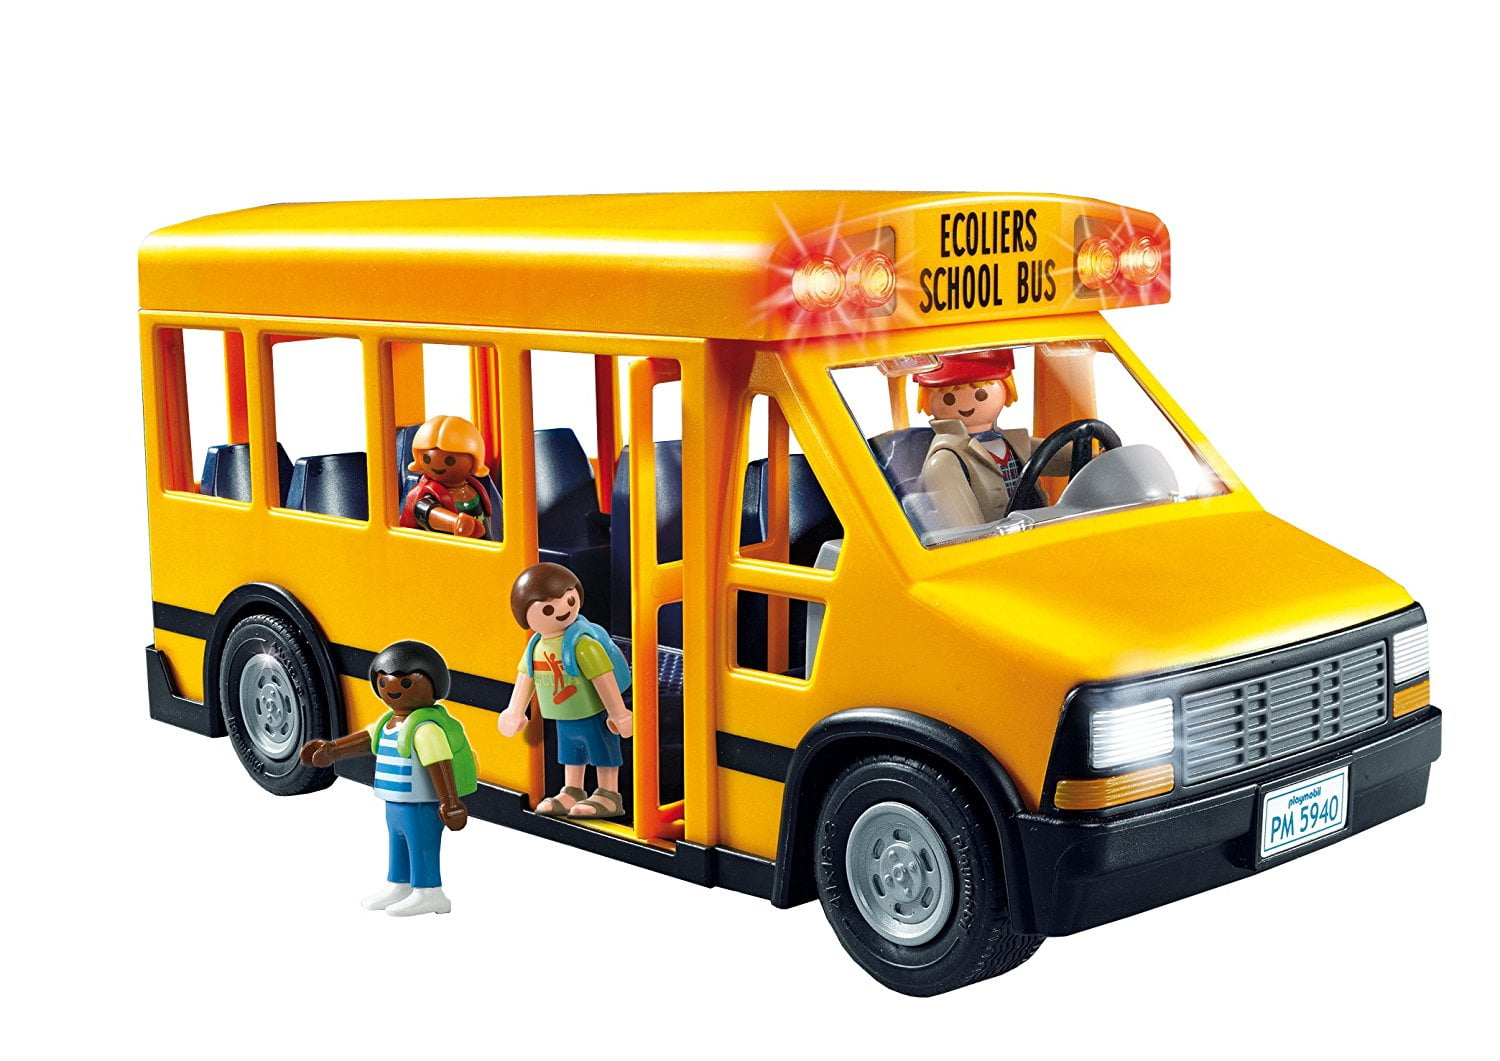 toy school bus for kids